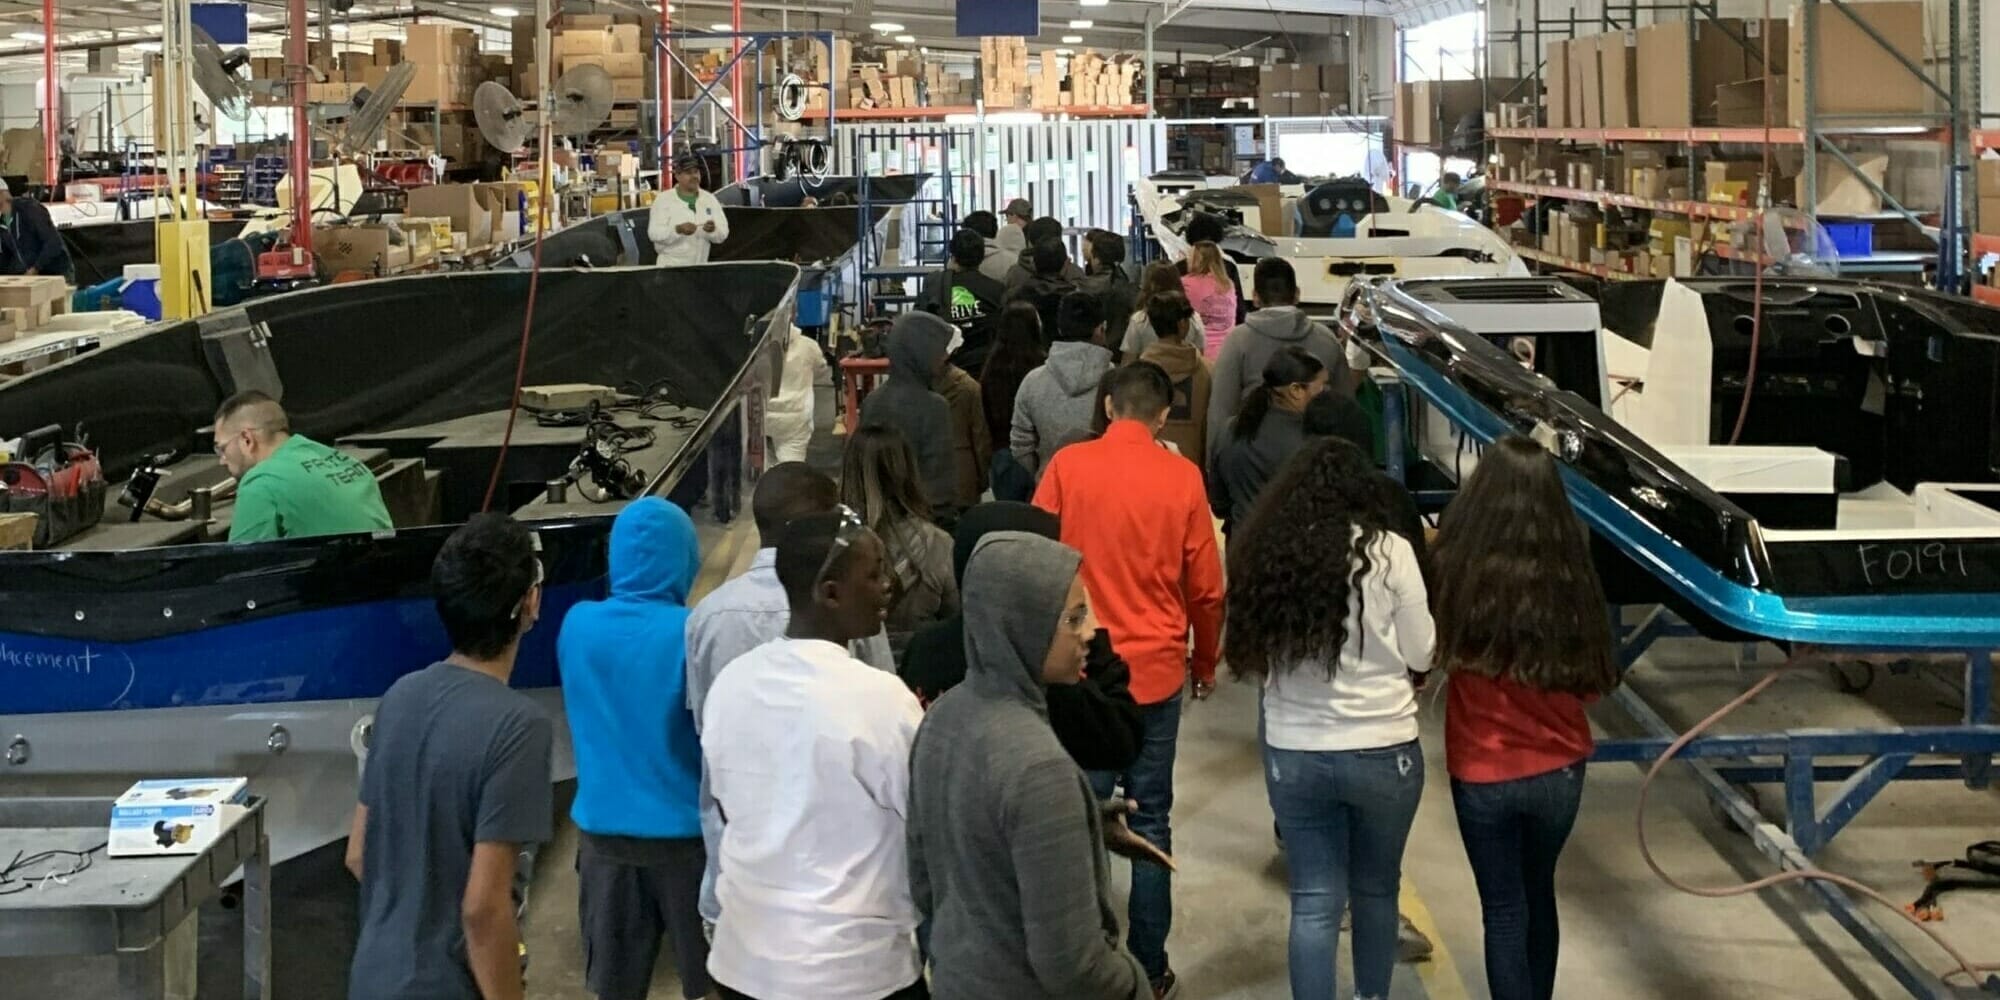 A group of people standing in a warehouse looking at Supreme Boats.